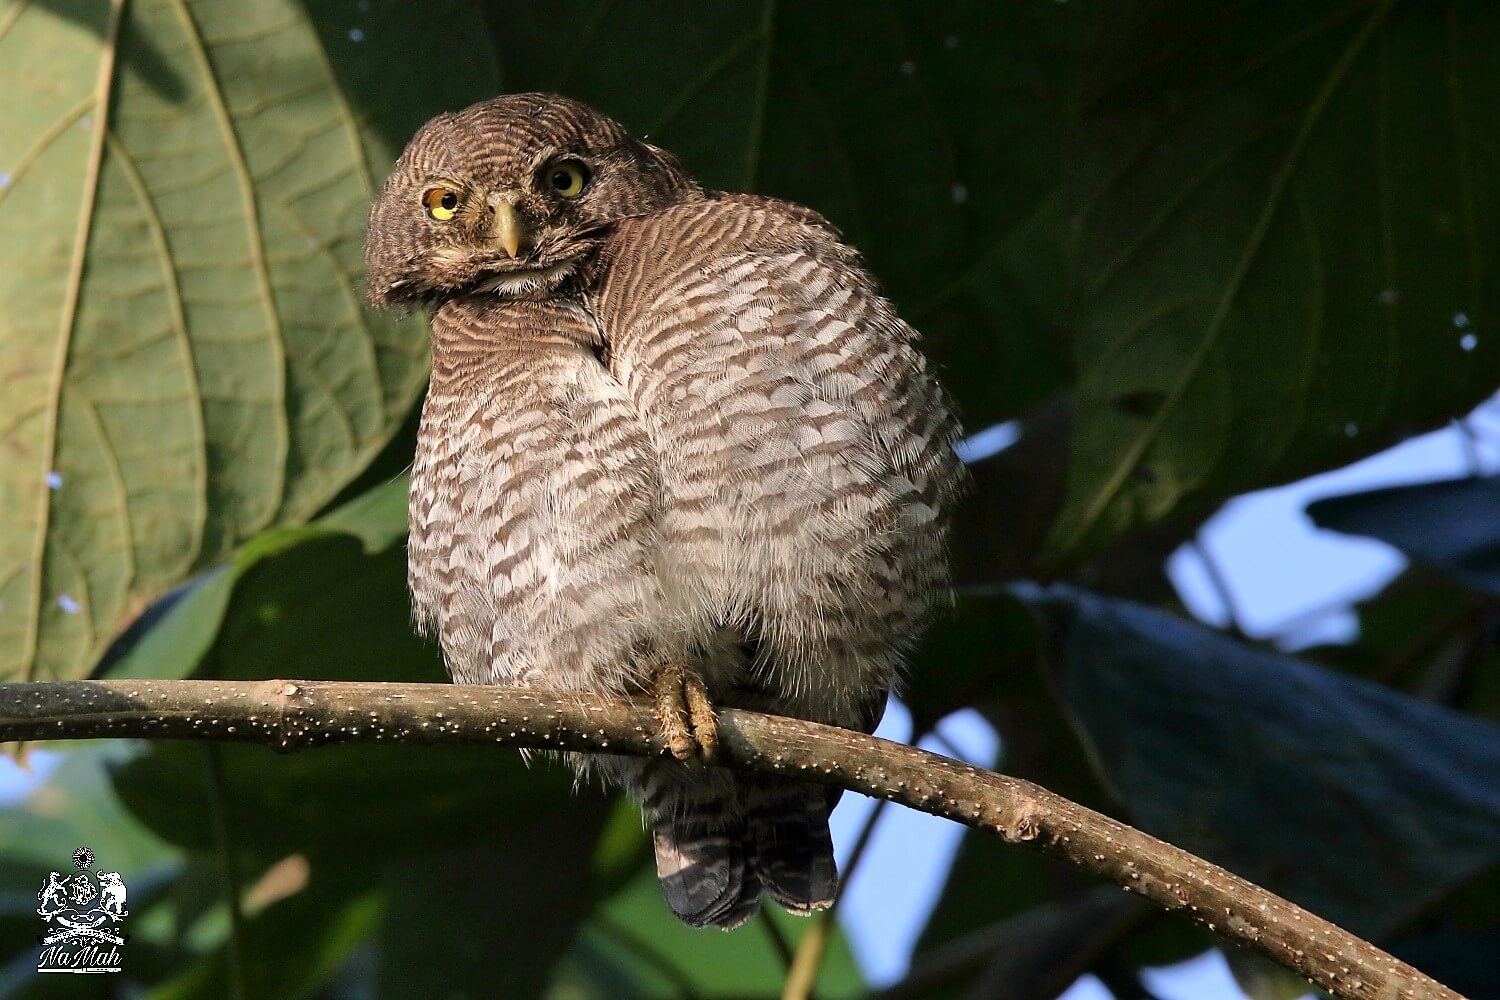 Owlet looking for prey clicked while on bird watching